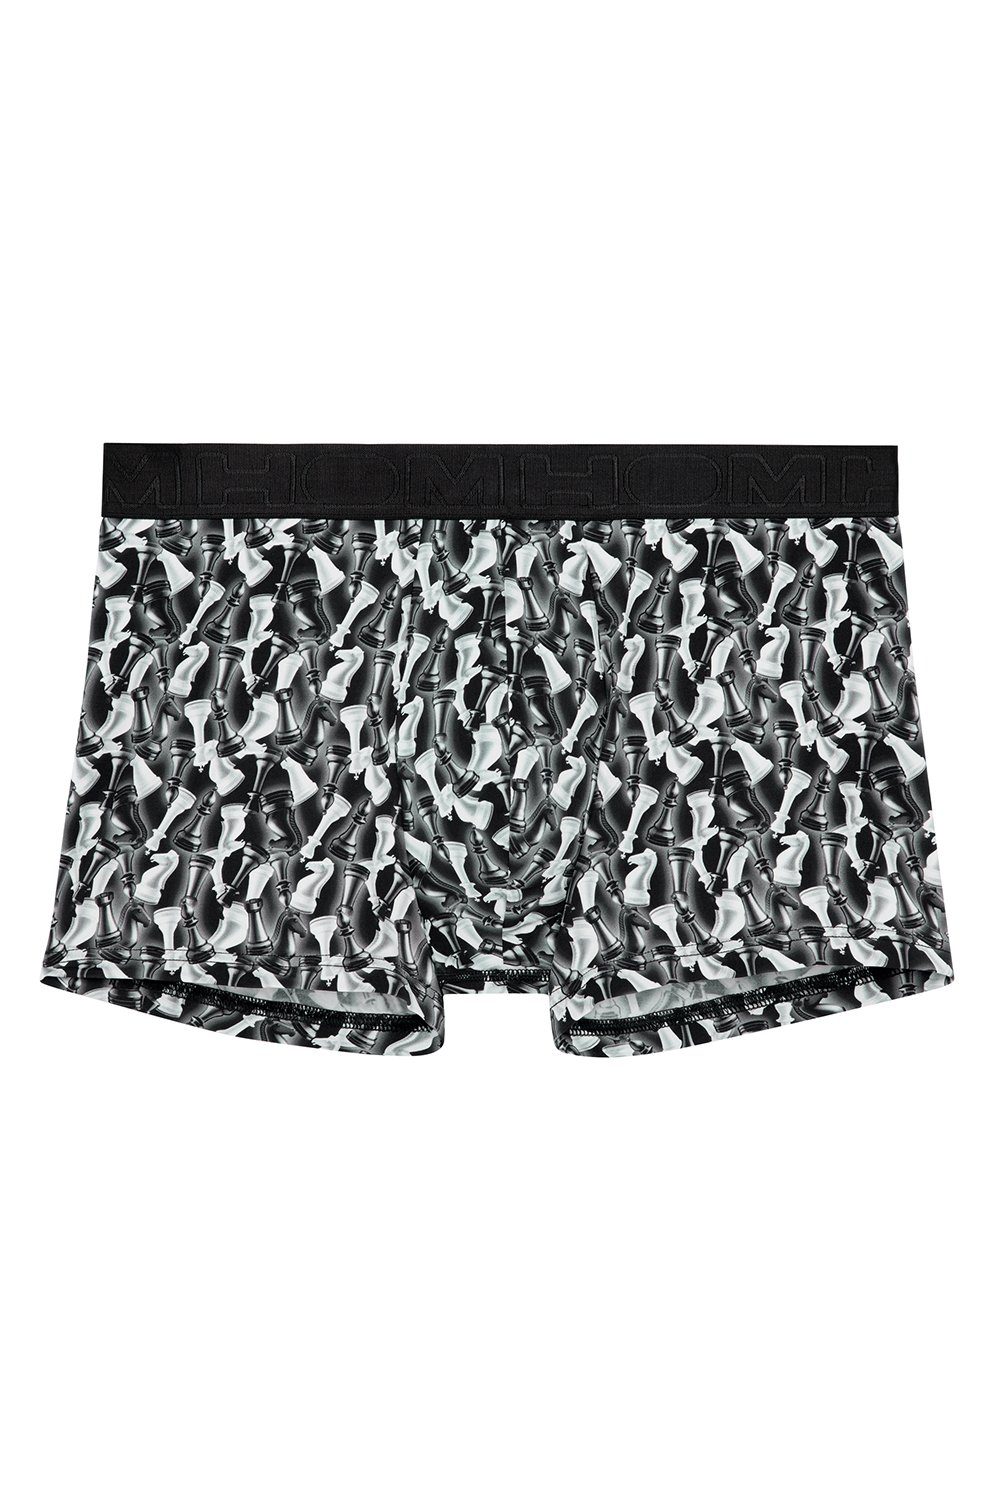 Hom Hipster Boxer Briefs Chess 402671